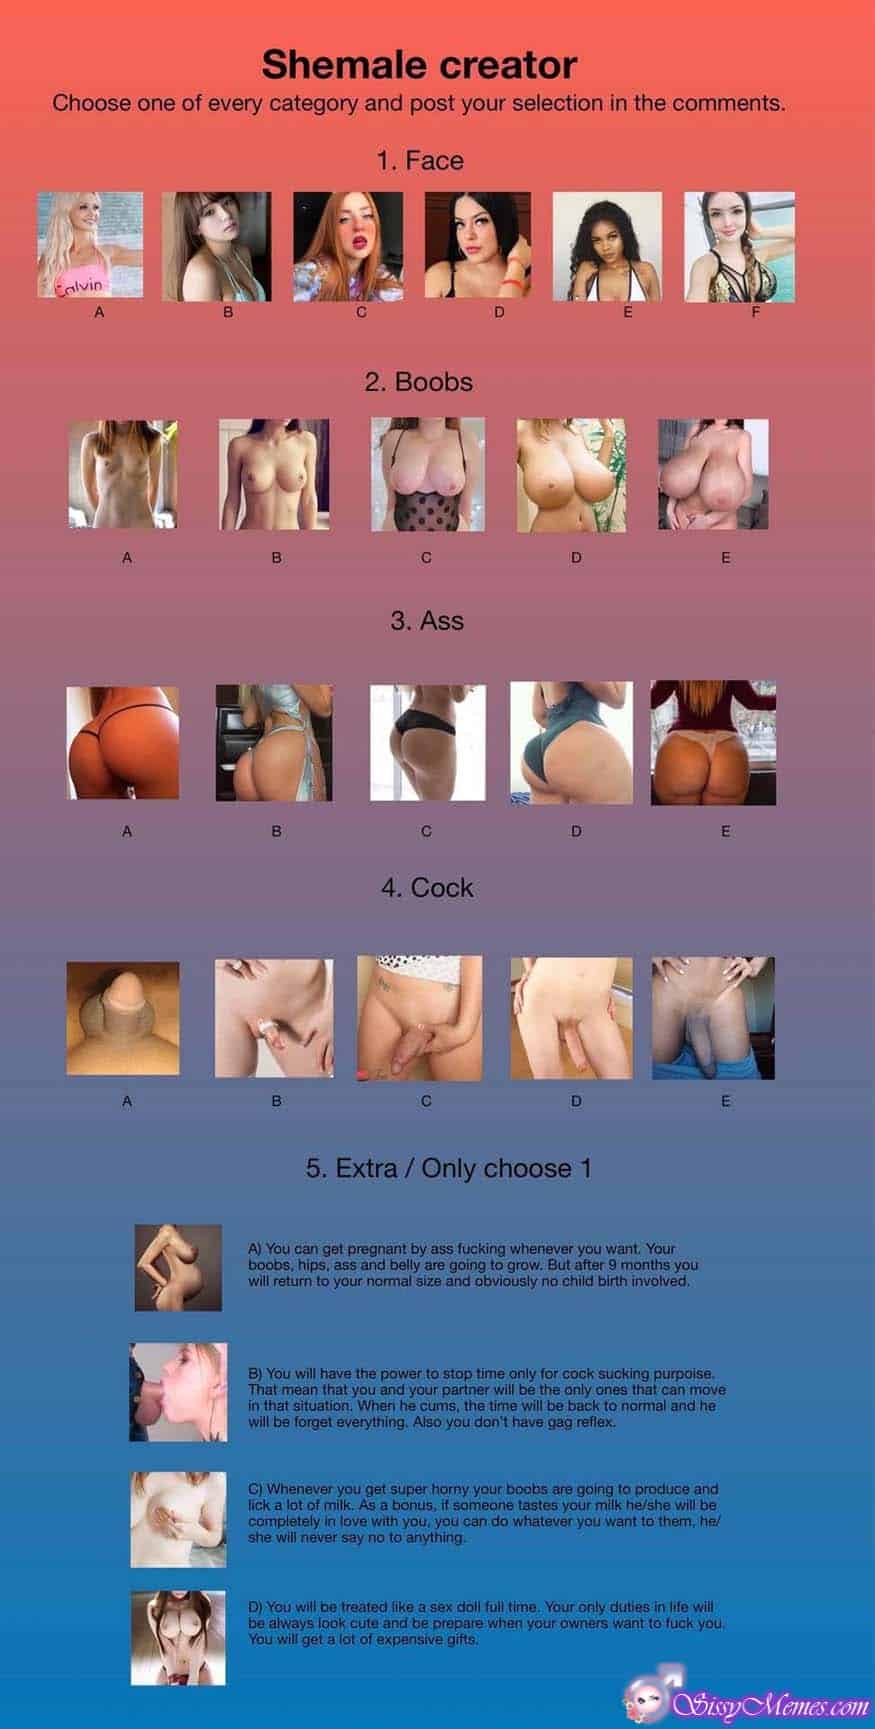 Training Hypno hotwife caption: Shemale creator Choose one of every category and post your selection in the comments. 1. Face 2. Boobs 3. Ass 4. Cock 5. Extra / Only choose 1 A) You can get pregnant by ass fucking whenever you want. Your...